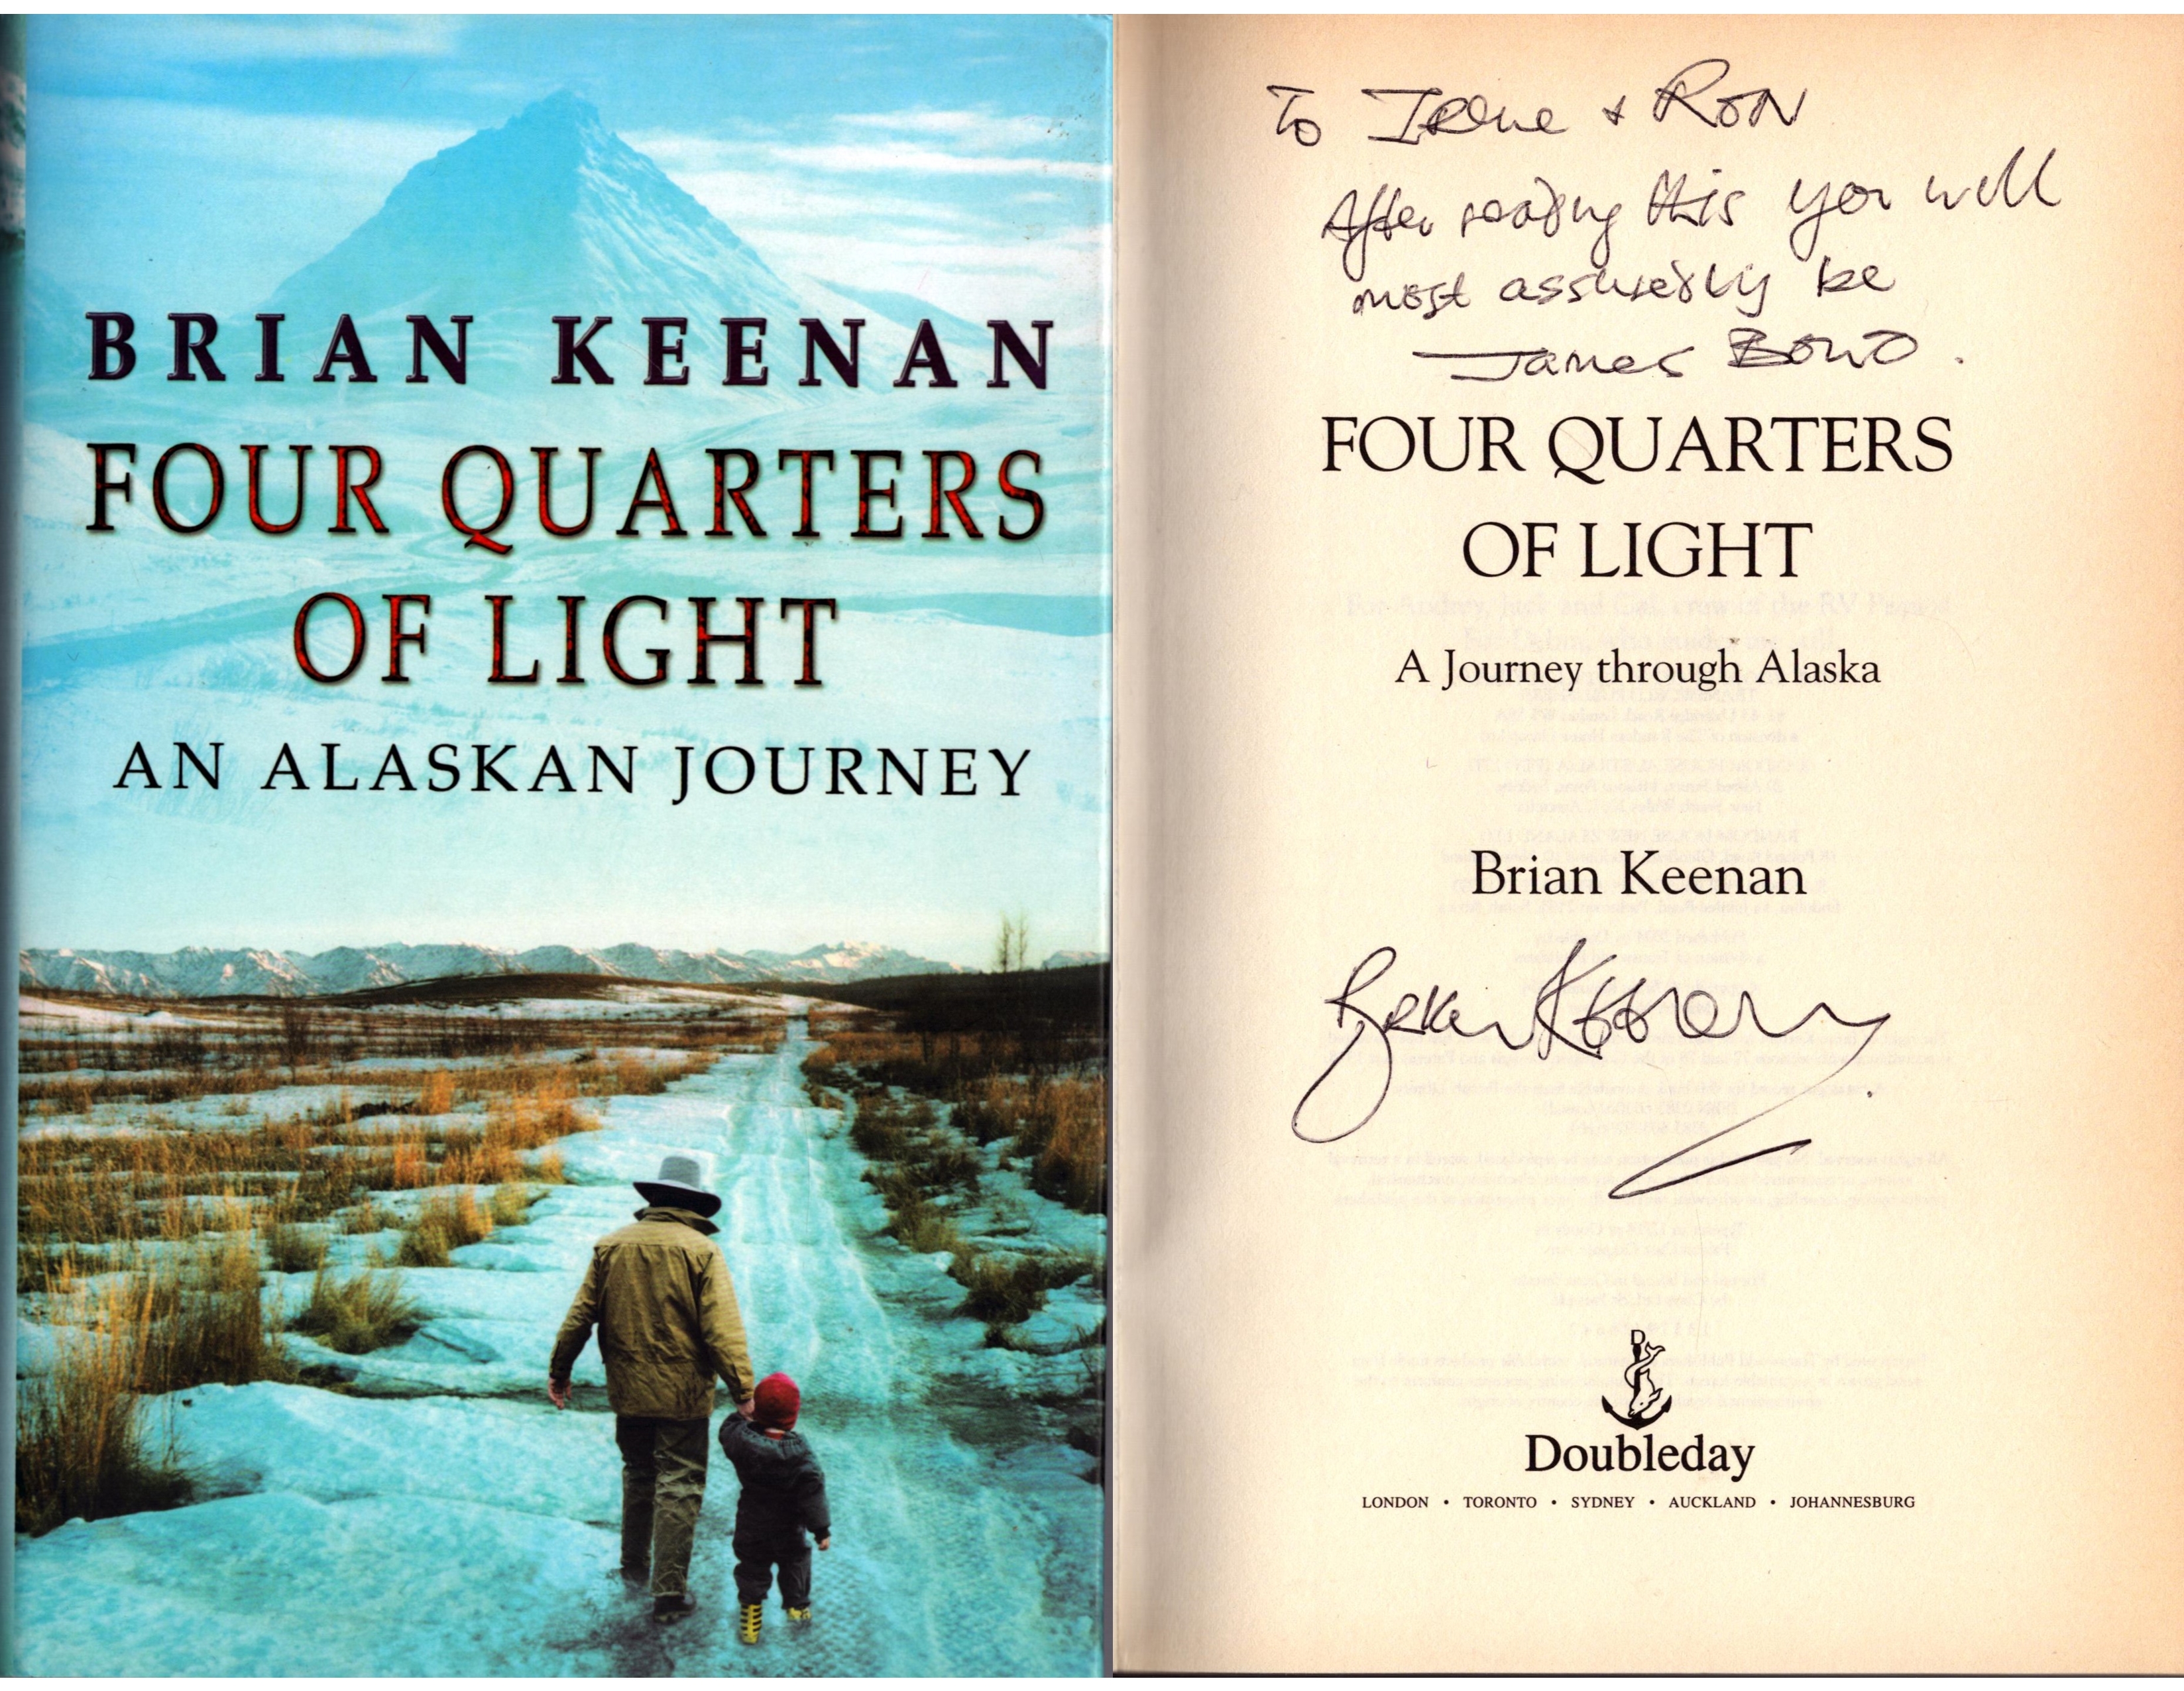 Four Quarters of Light: An Alaskan Journey by Brian Keenan signed by author, First Edition/First